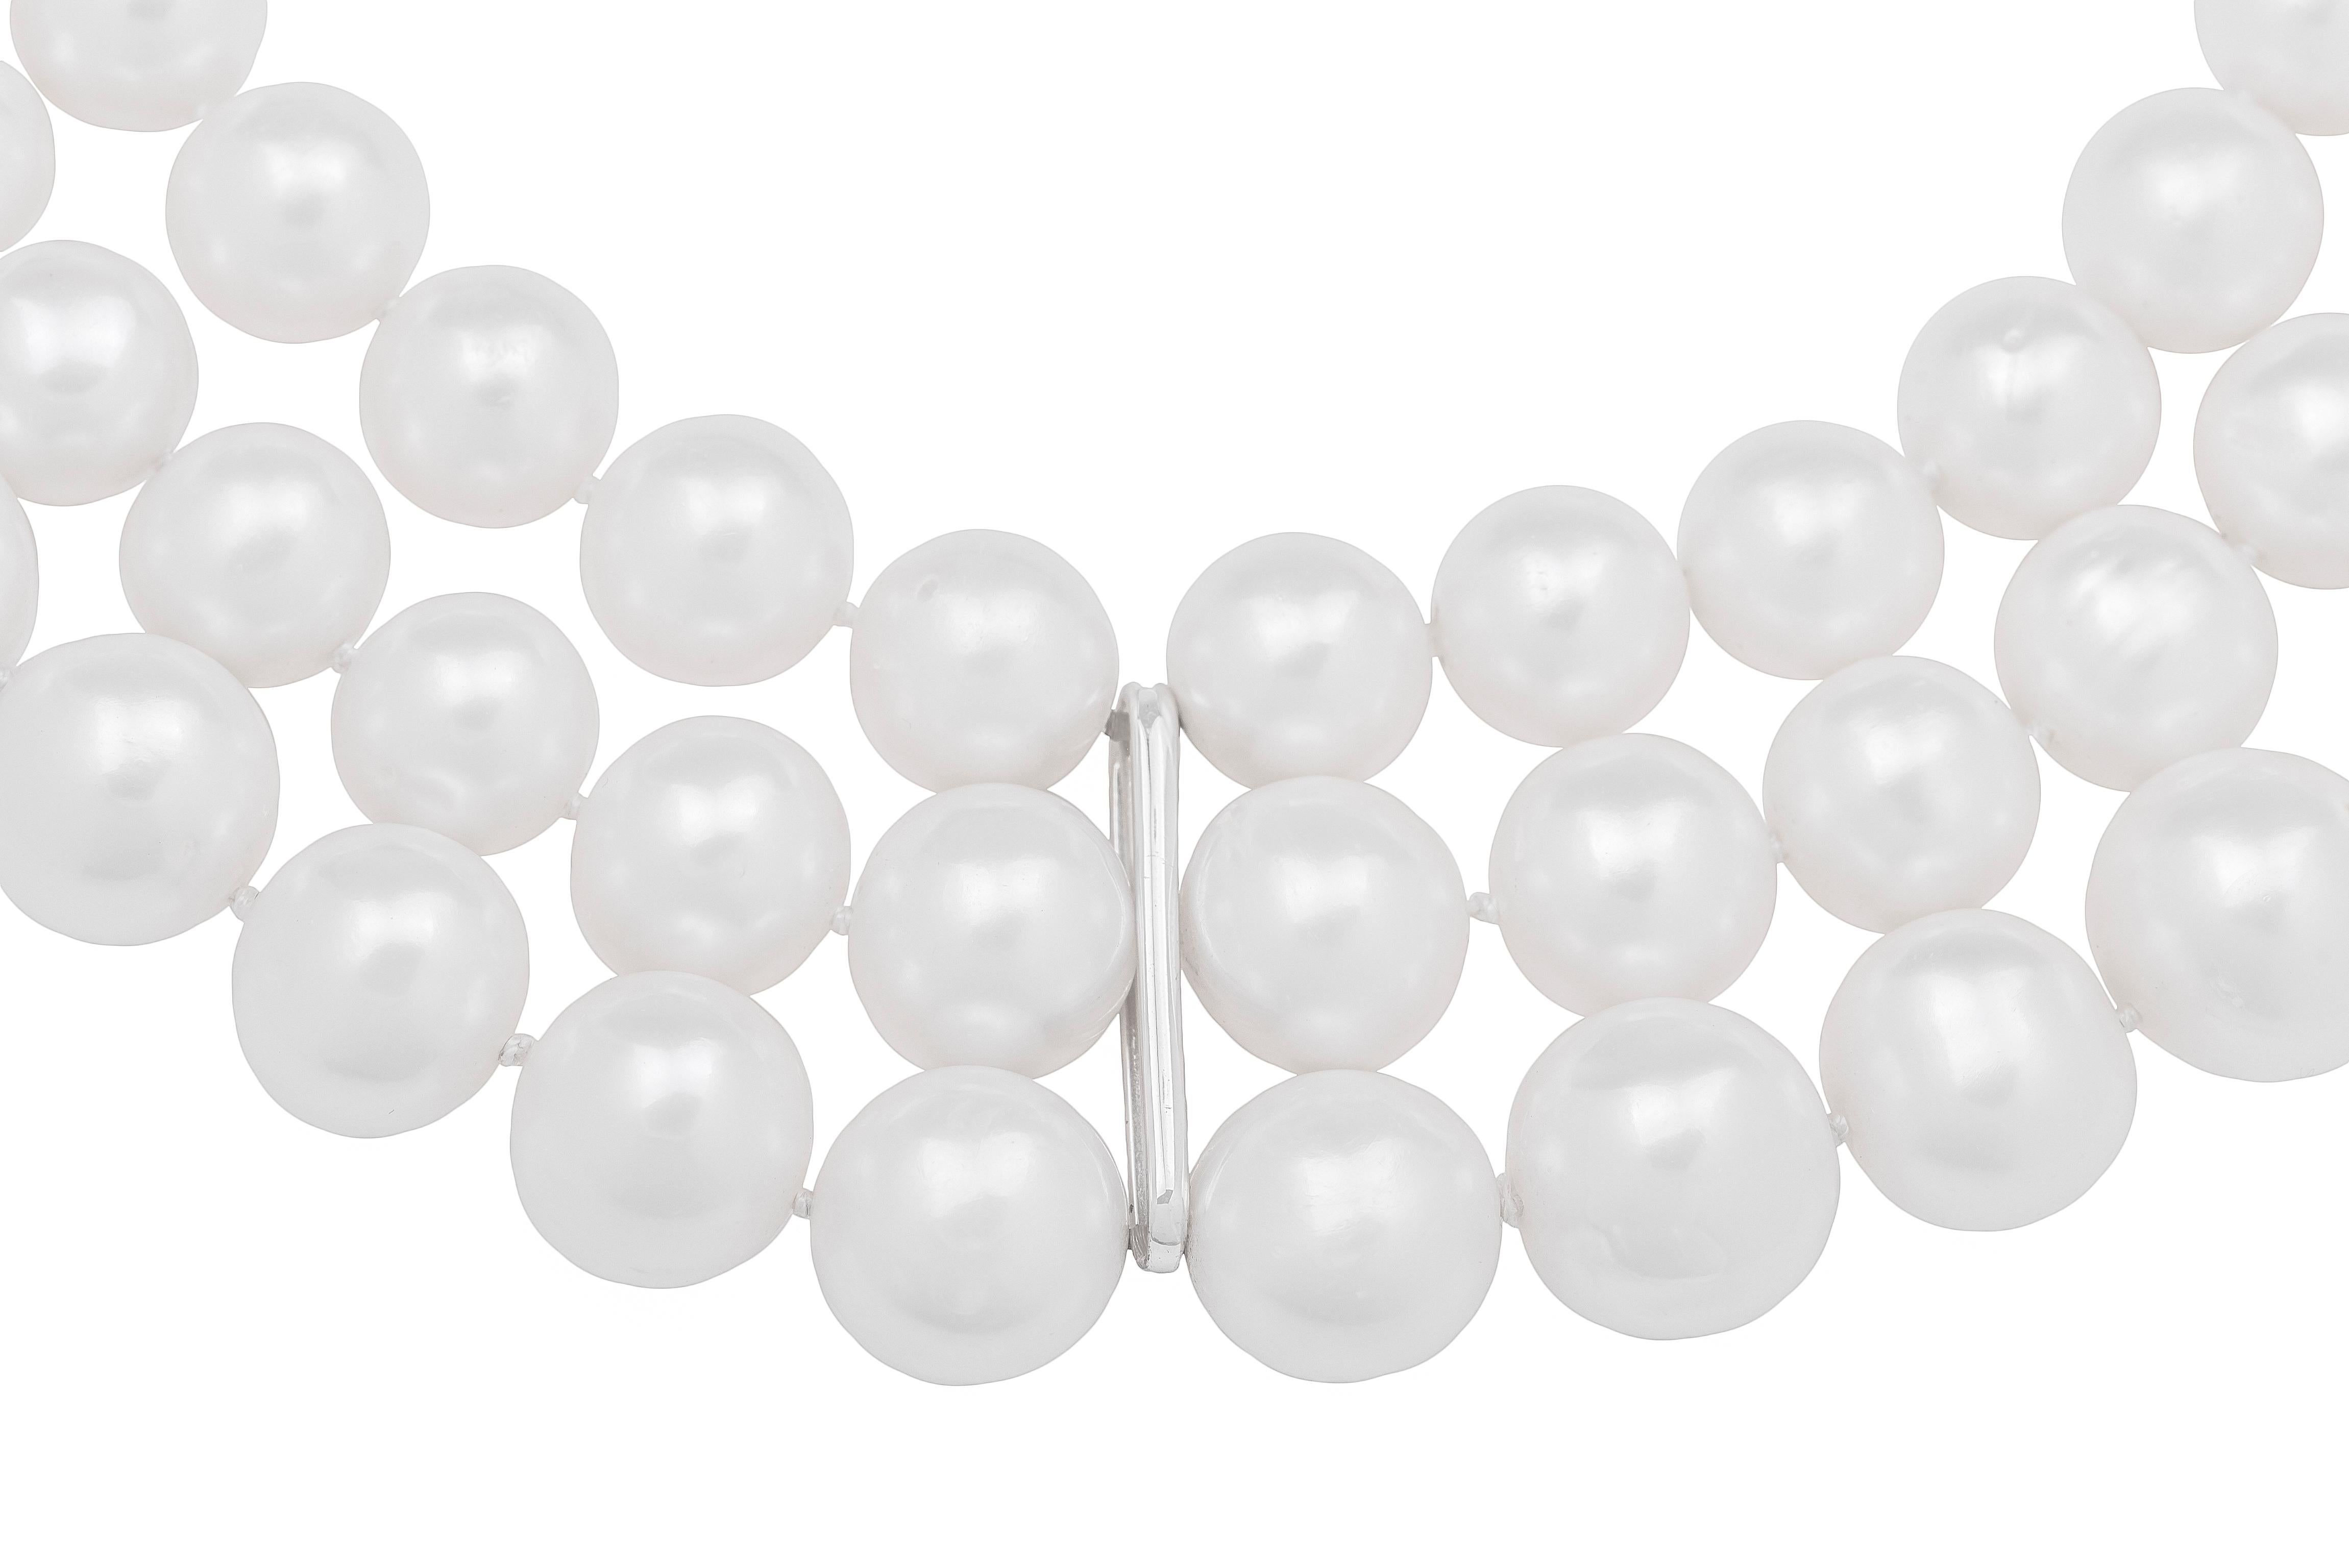 White Pearls and 18k White Gold Necklace
This elegant necklace is a classic jewel made in Italy by Fanuele Gioielli.
It features three rows of white freshwater pearls. The size of the pearls increases from the inner row to the outer one. Four white